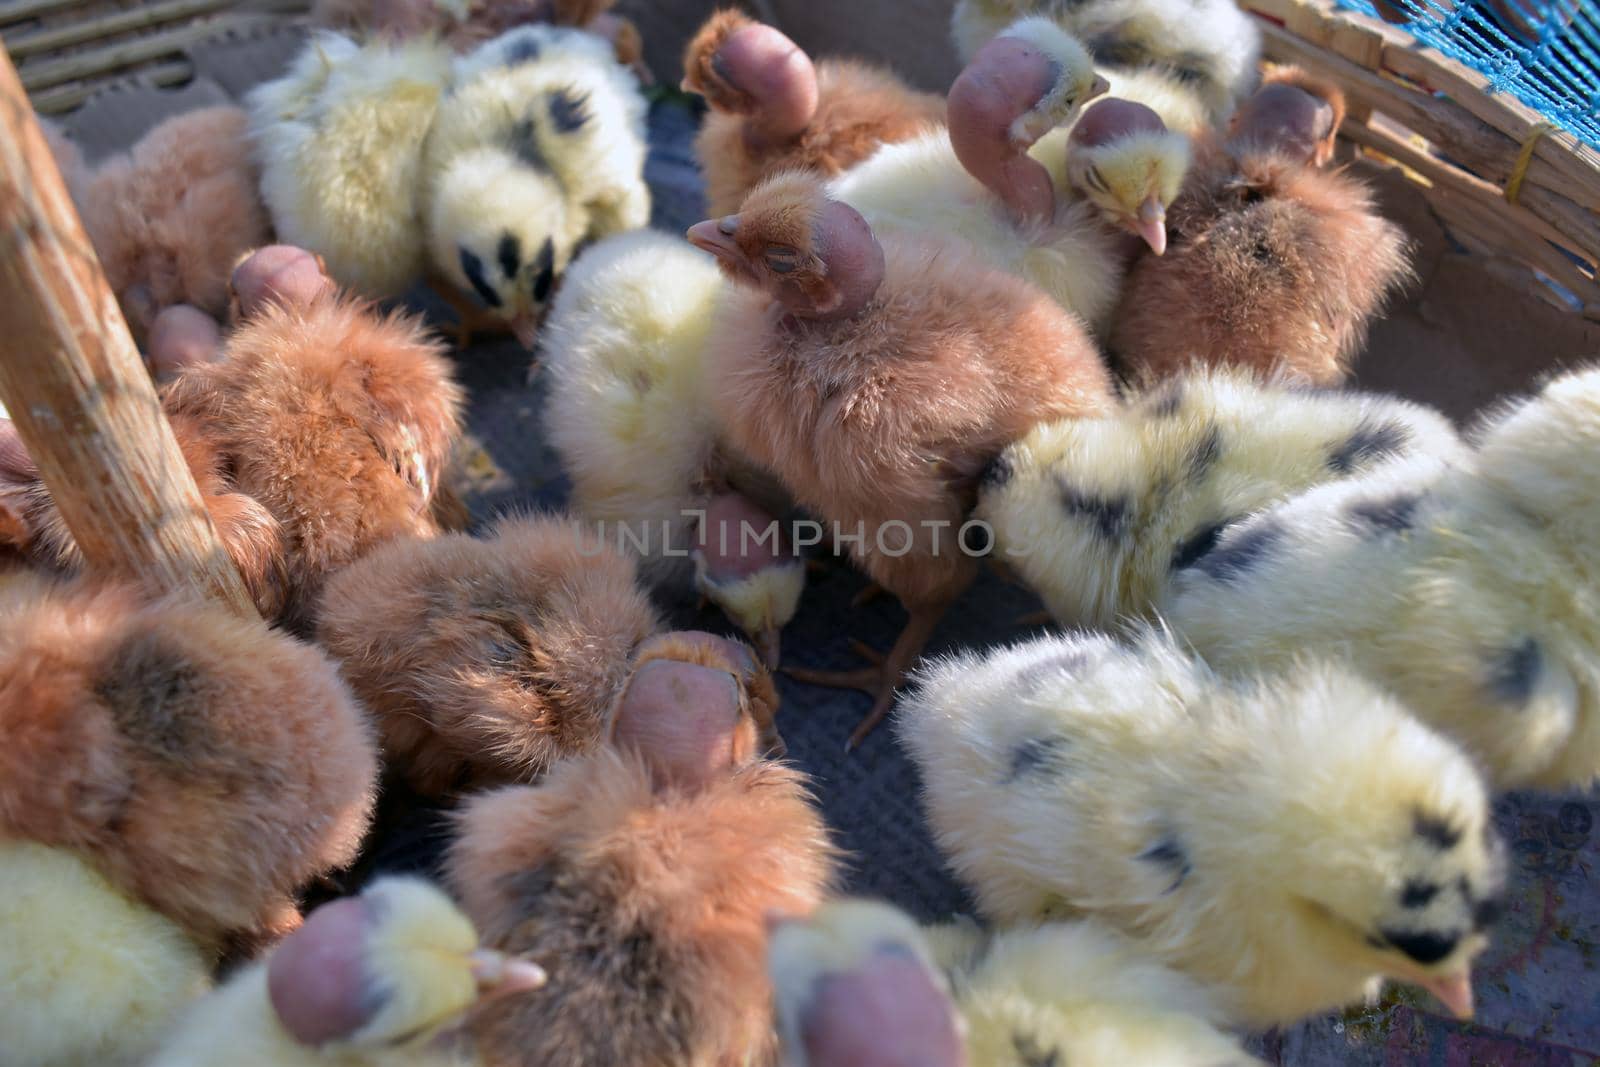 Chickens in a cage, closeup shot of chicks on a bamboo basket, Many chicks are kept in cages for sale. by tabishere